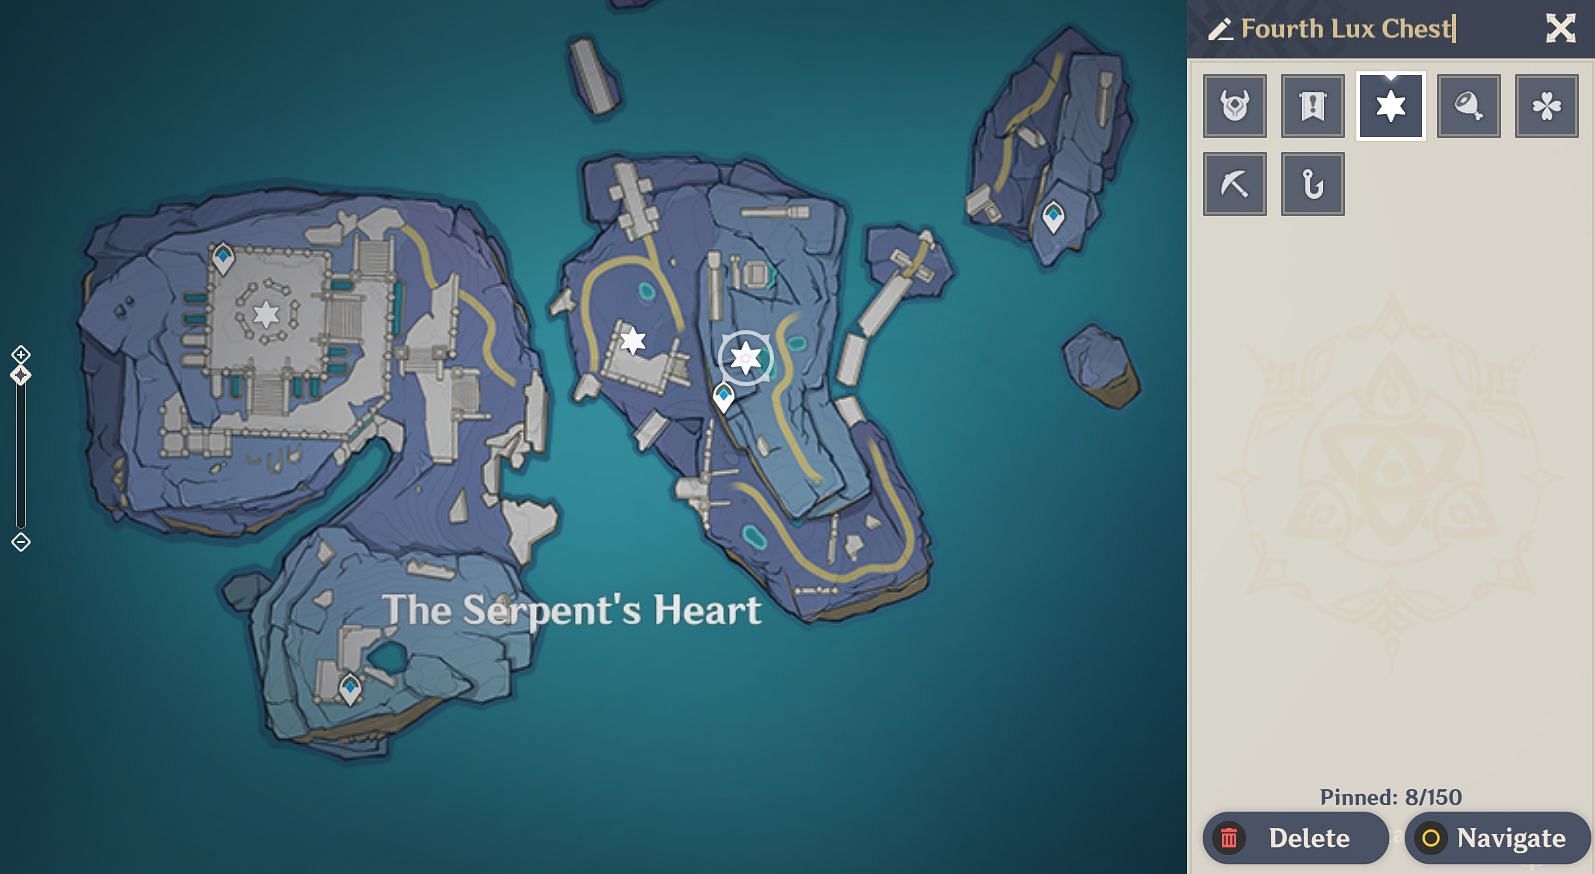 Location of the fourth Luxurious Chest on the map (Image via Genshin Impact)